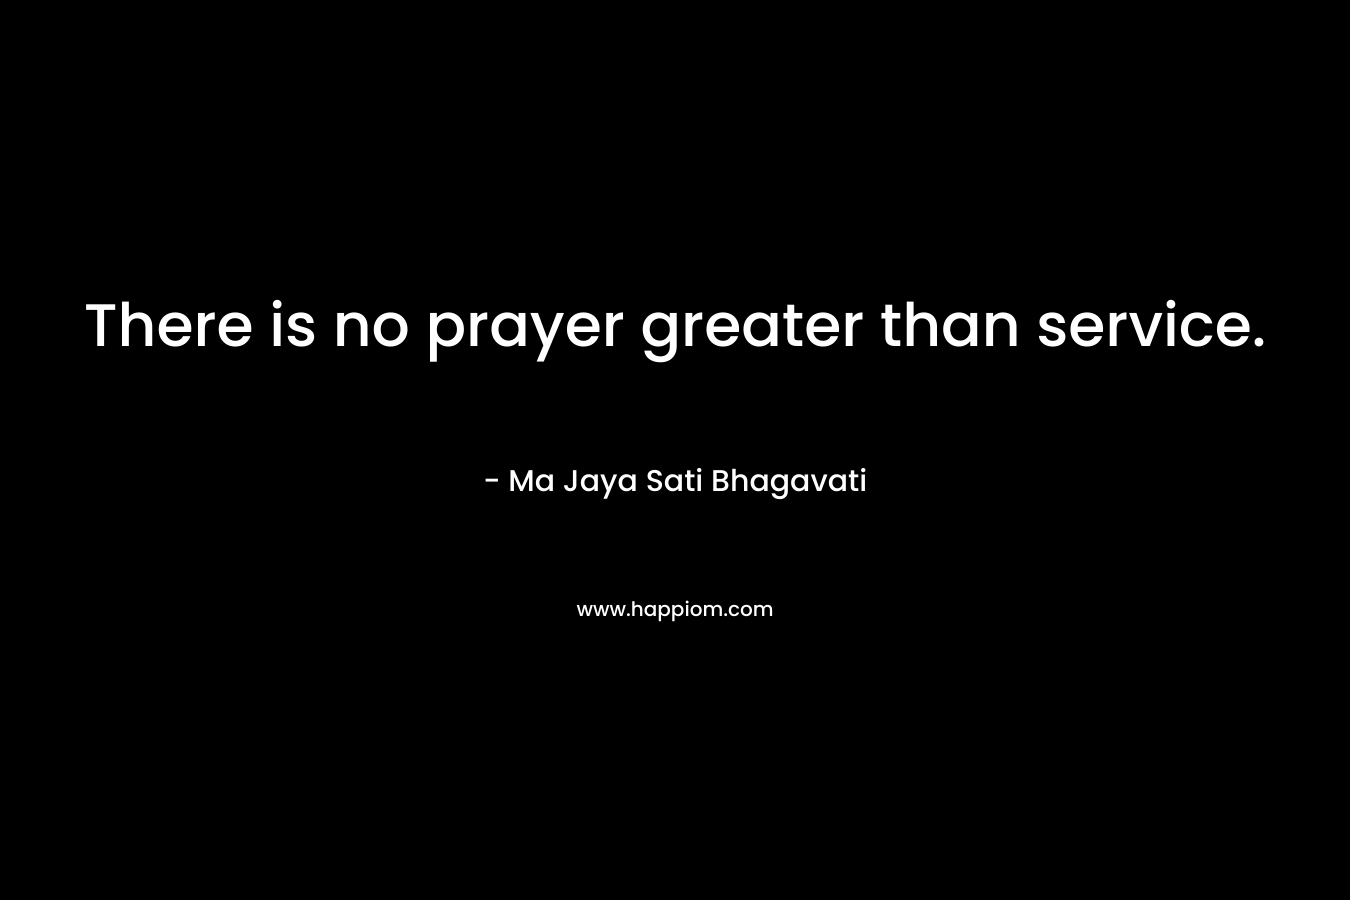 There is no prayer greater than service.